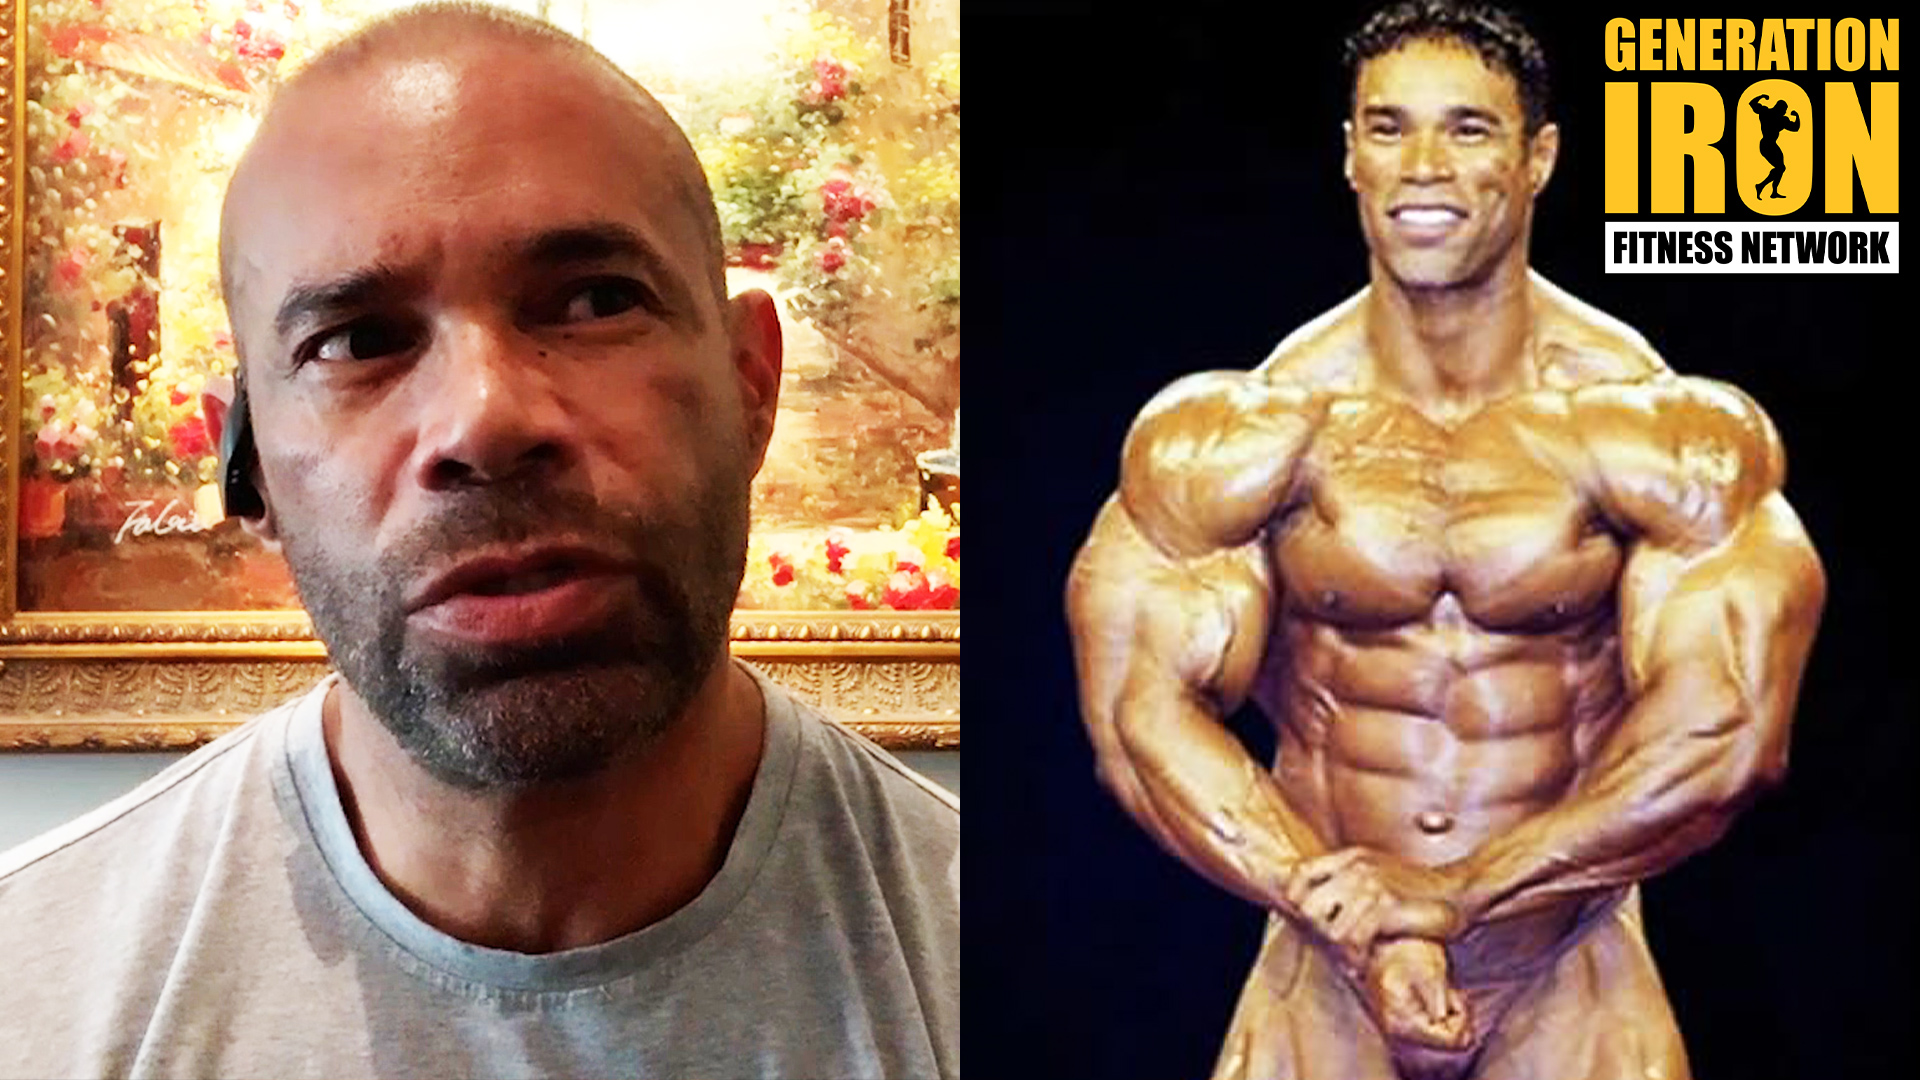 Why did Kevin Levrone not win Mr. Olympia? - Quora